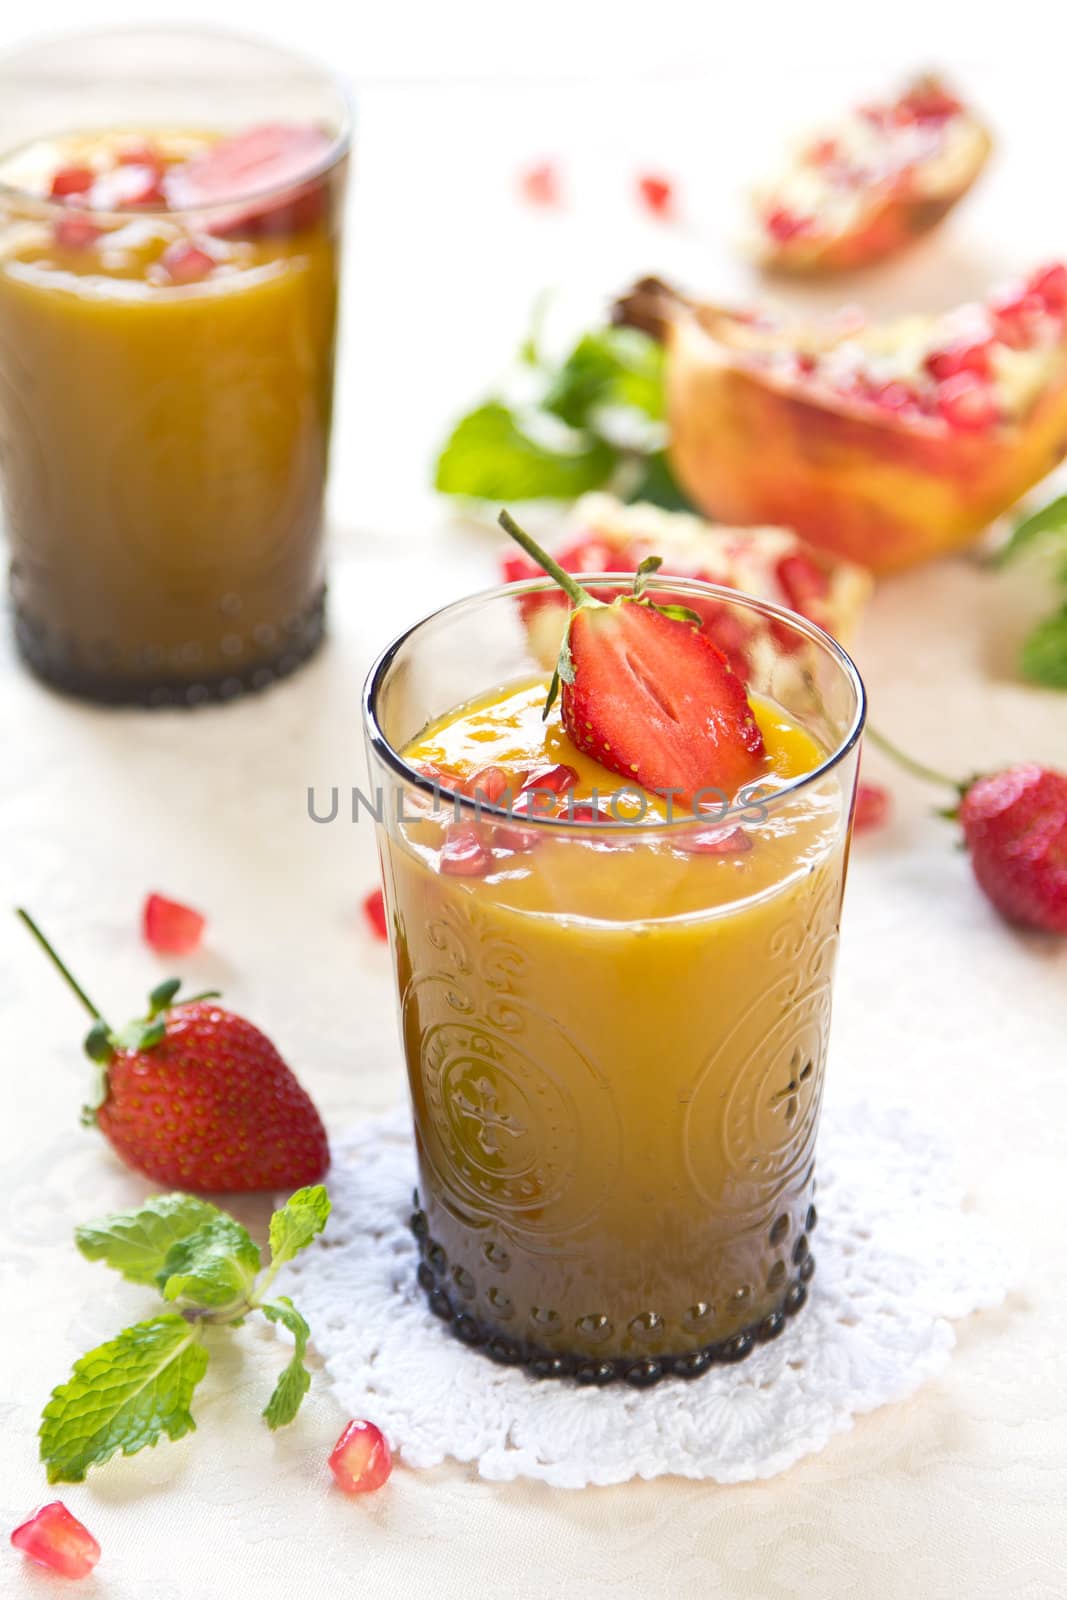 Mango and pineapple smoothie with fresh pomegranate and strawberry on top